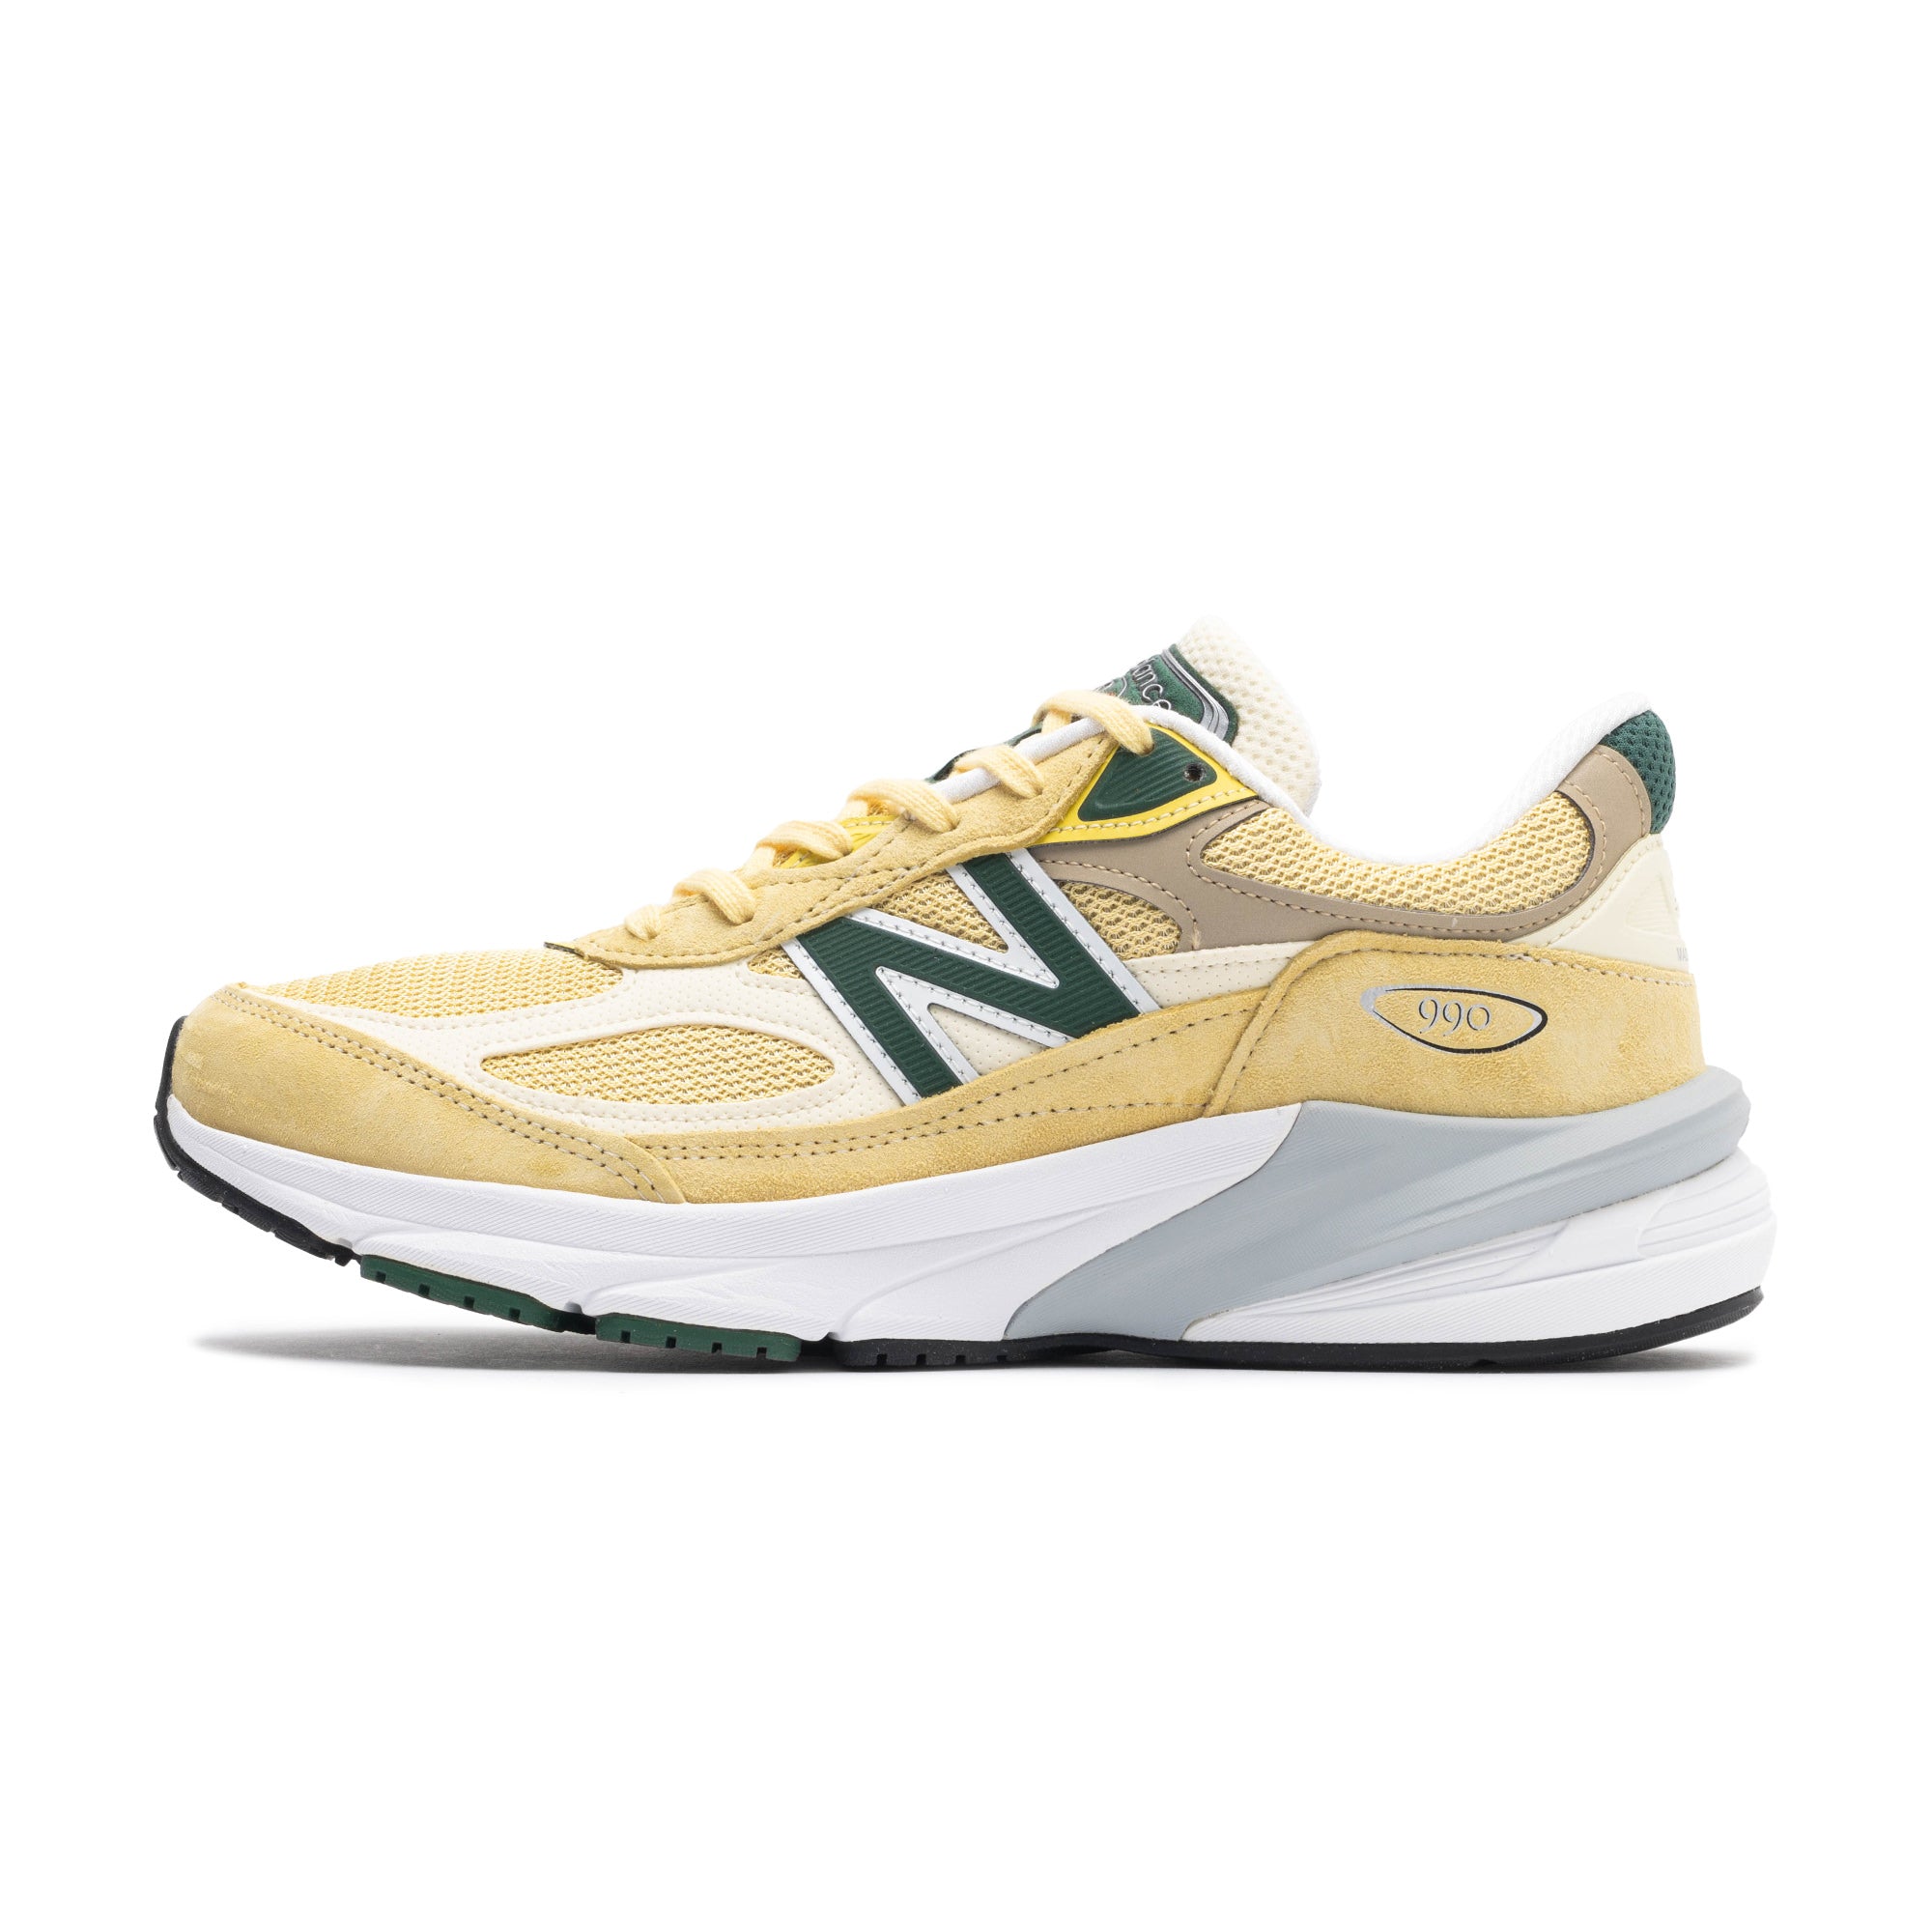 and even New Balance earlier this year to reimagine the